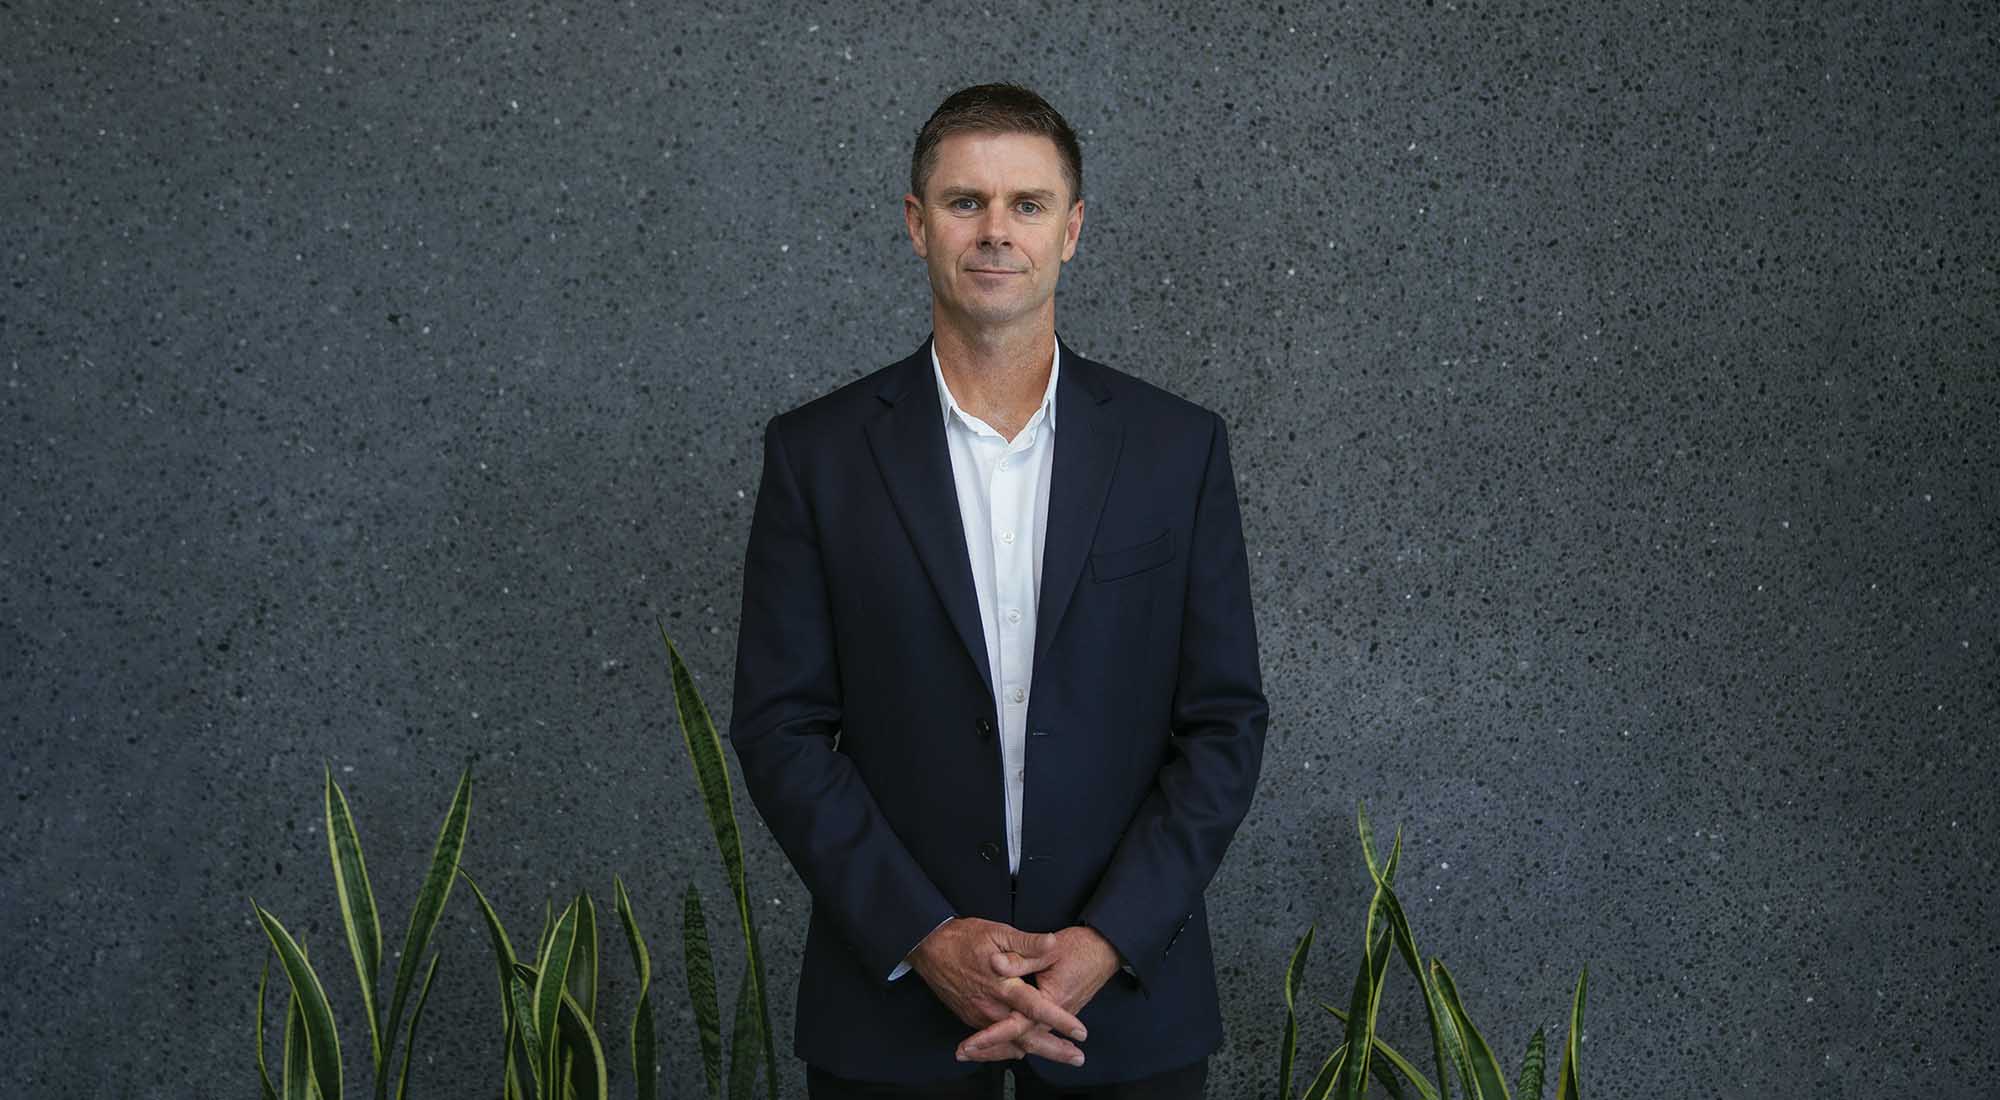 “There is a lot of room at Datacom for entrepreneurial thinking and there is latitude and support to try things and to learn and grow," says Peter Nelson.